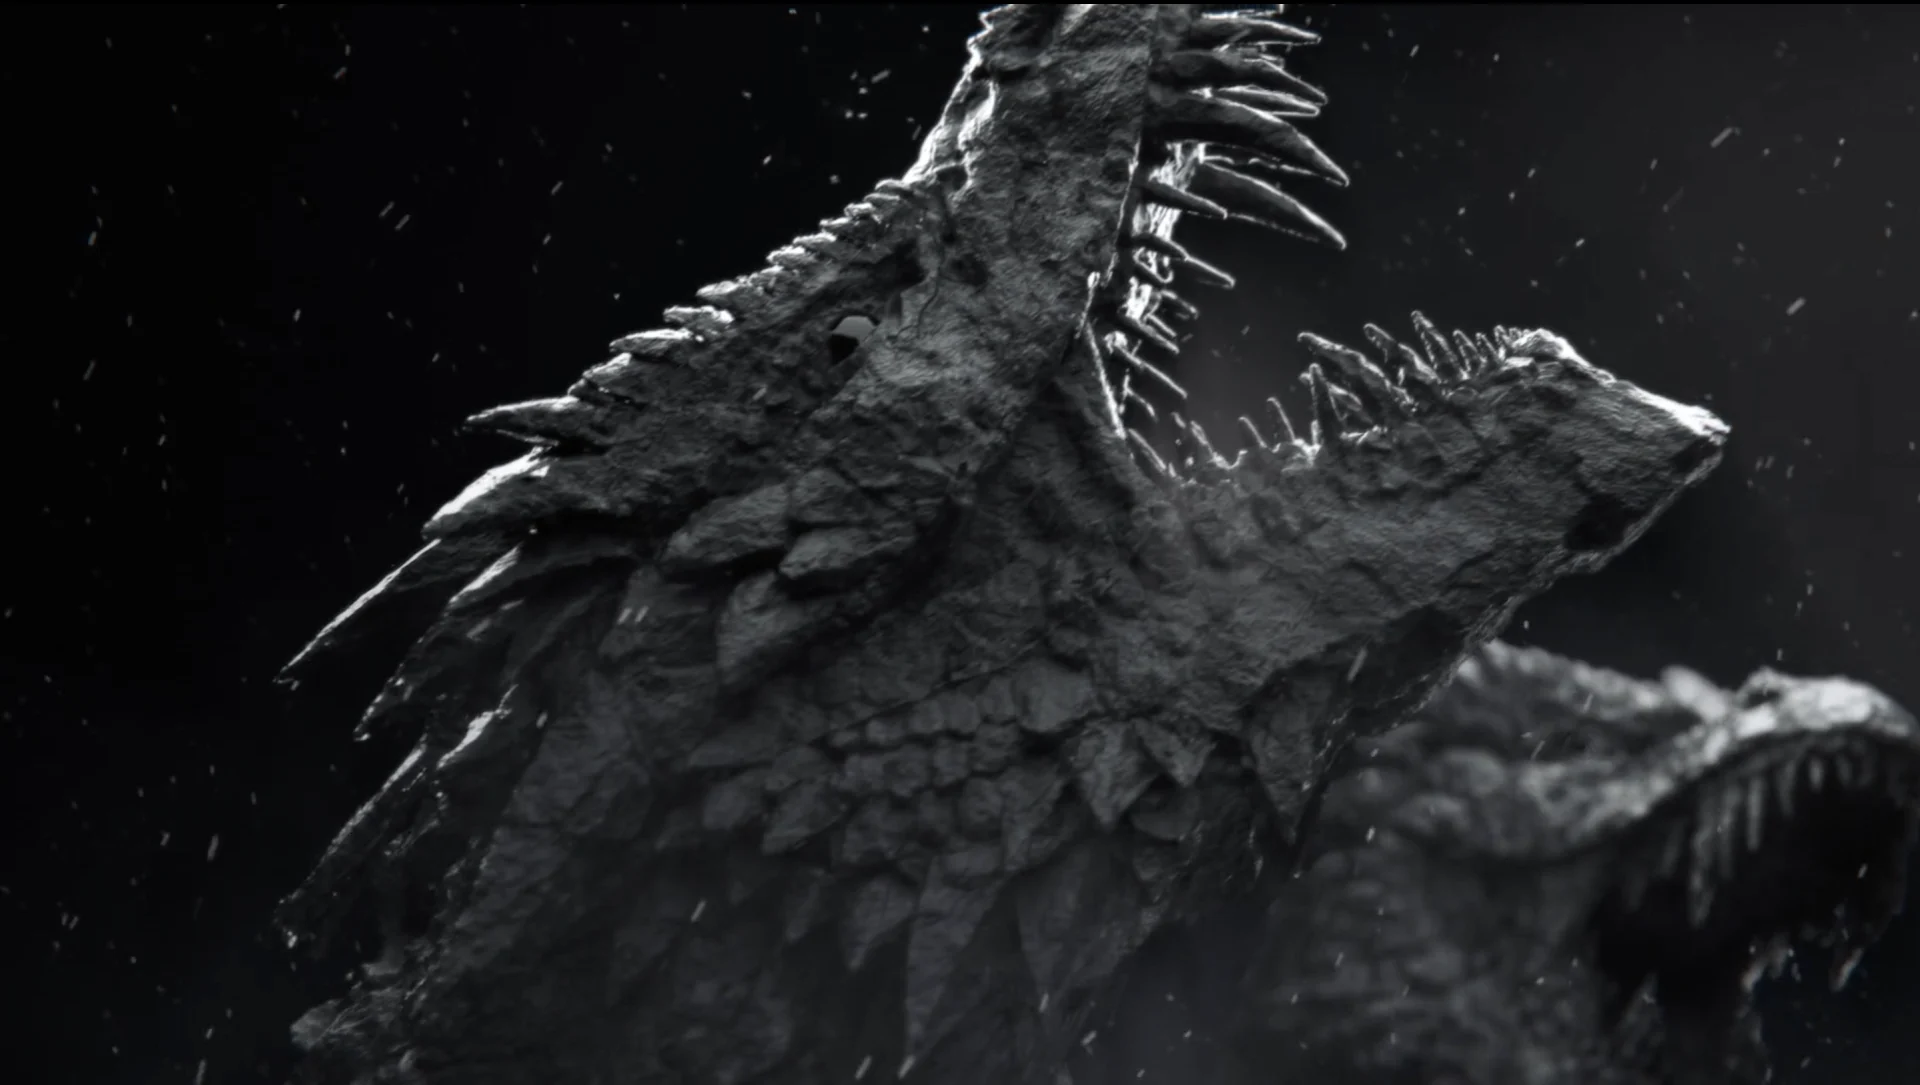 More dragons, please! We are proud to continue our work with HBO on Game of Thrones with the making of season 7’s teaser by creating something fresh, dramatic, and attention-grabbing without using new footage. 
